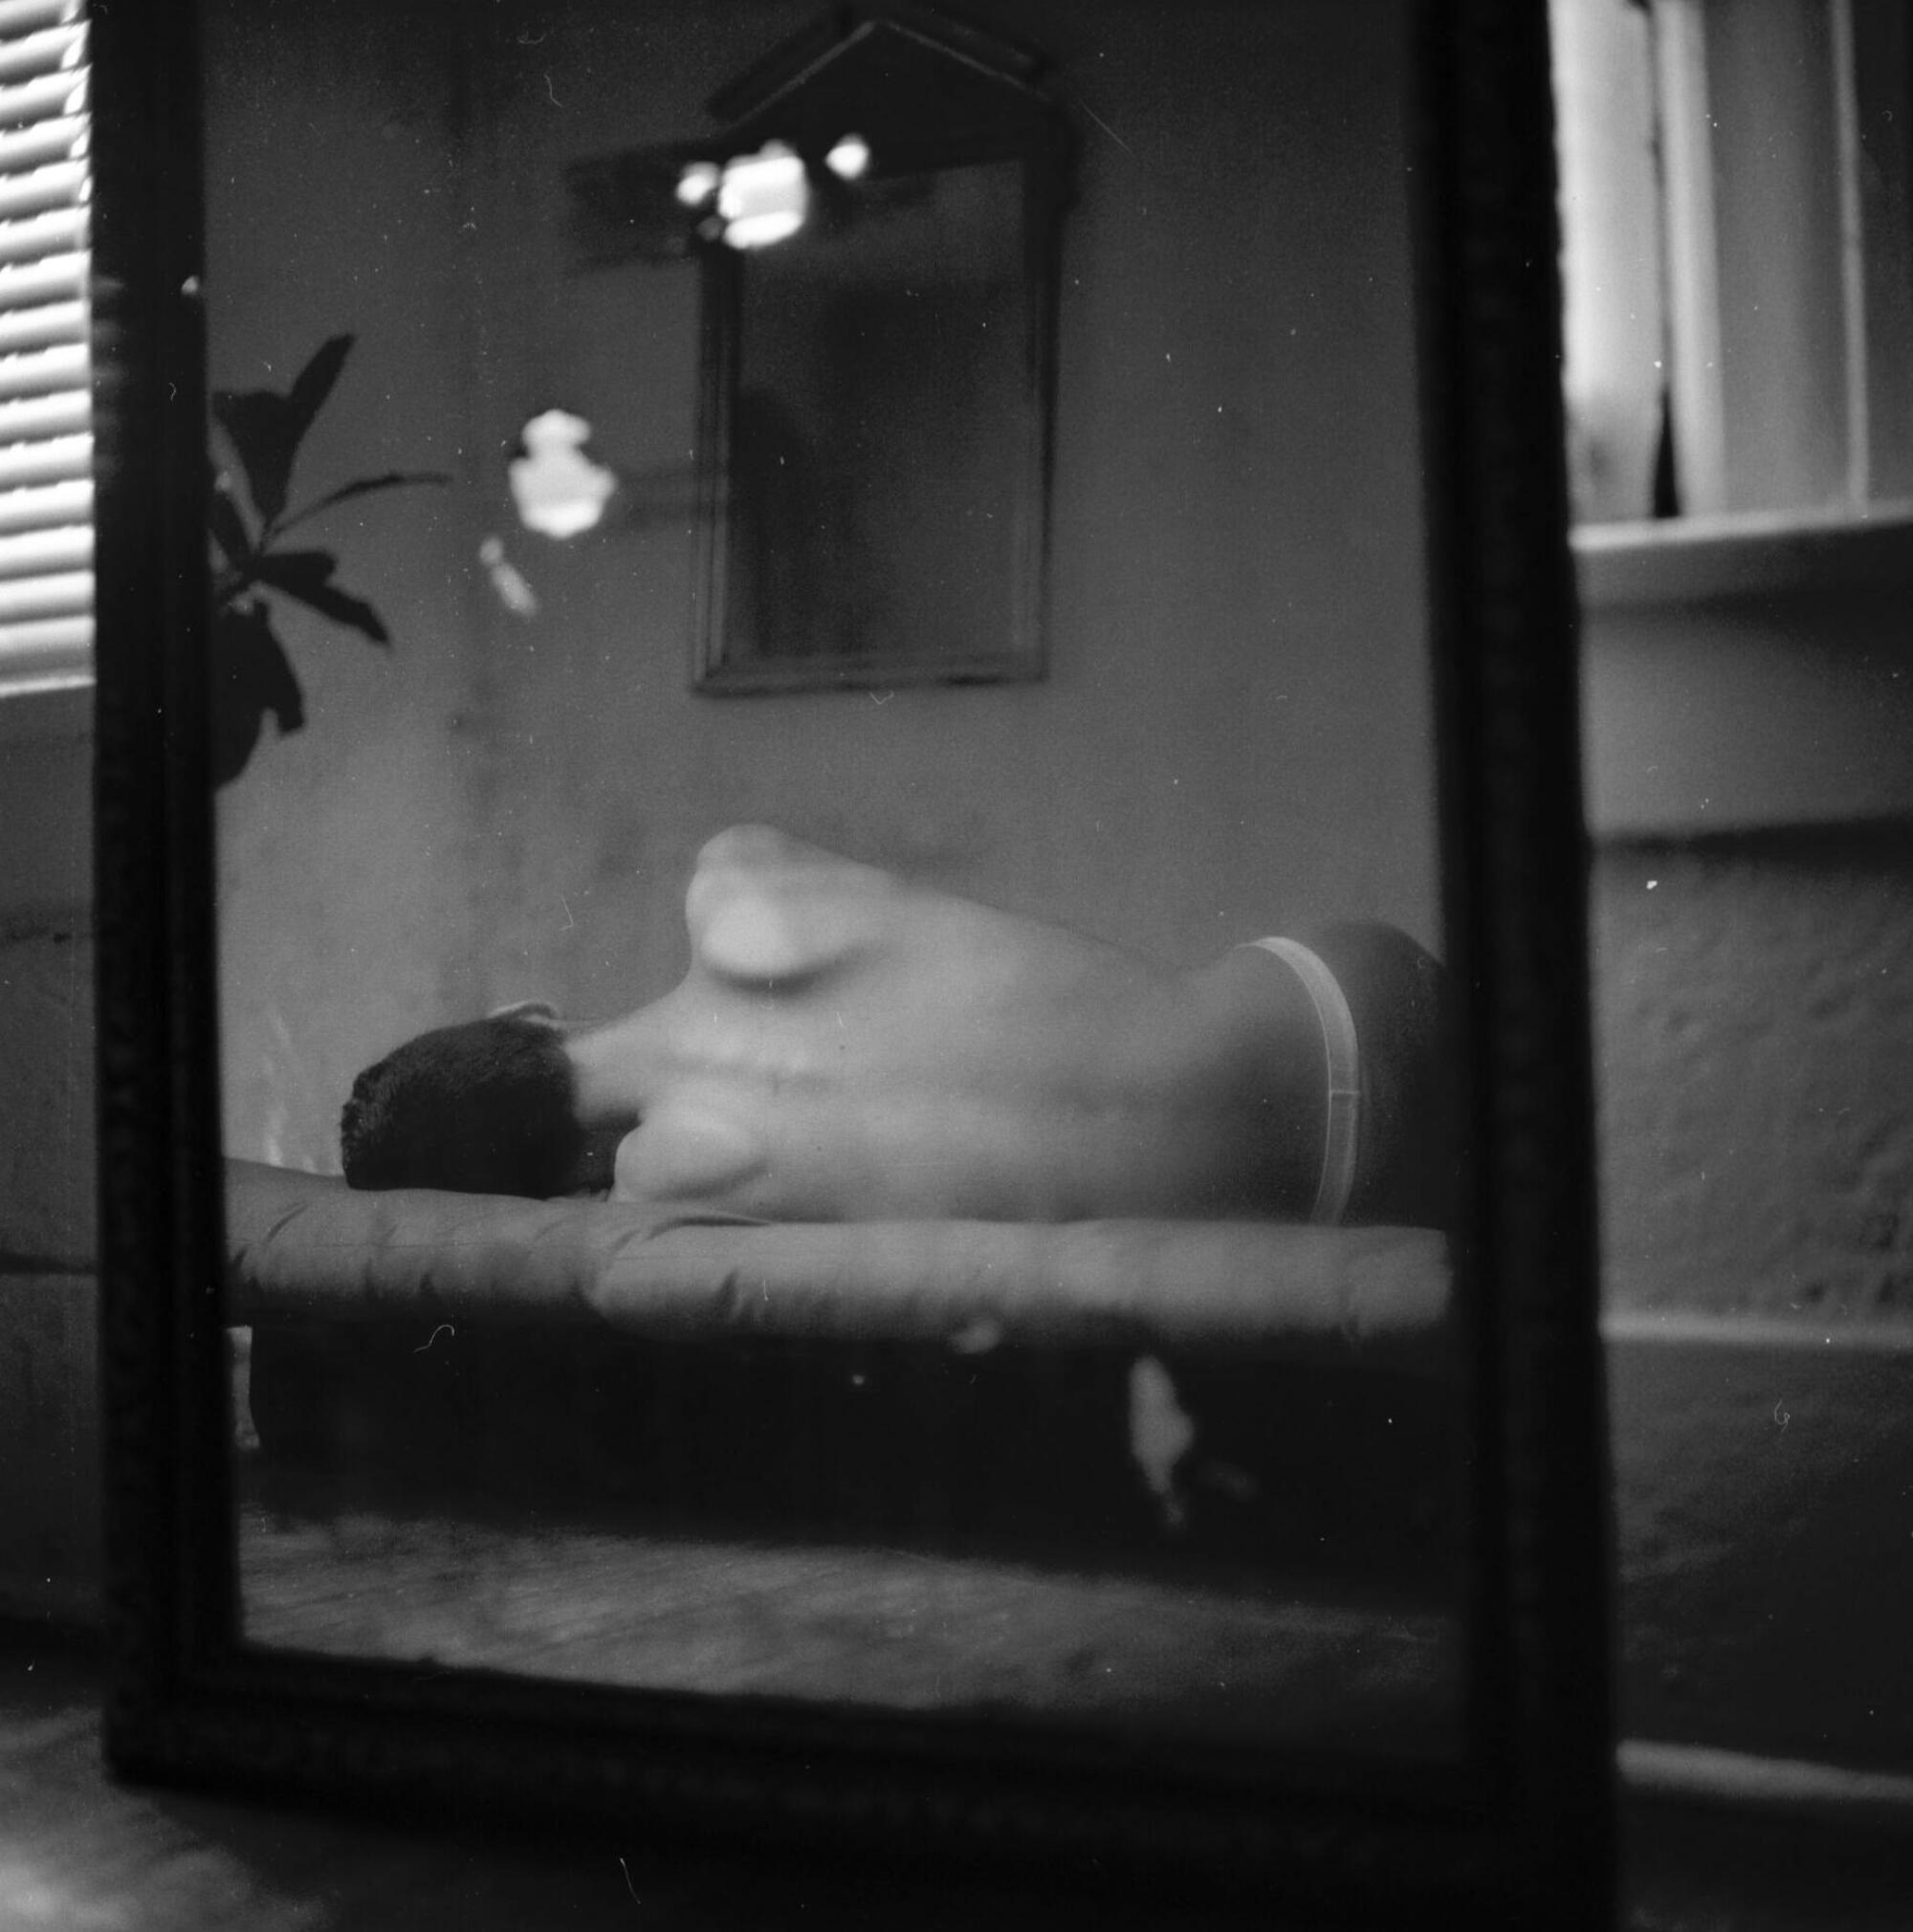 "Bianco, Echo Park — 1992" shows a short-haired person lying on their side, topless, with their back to the camera.